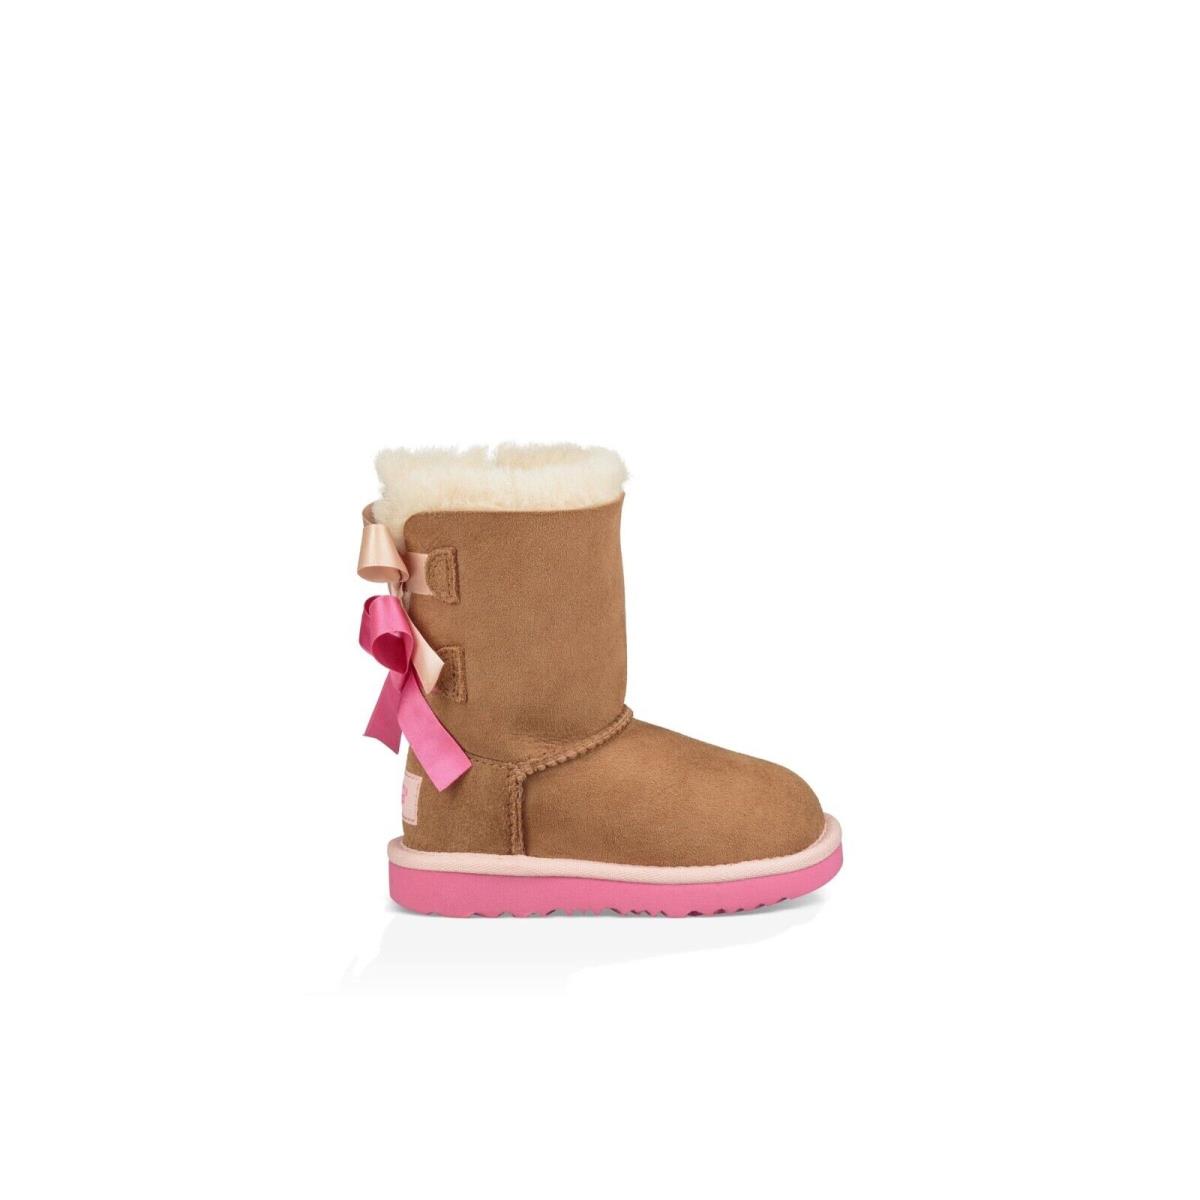 Ugg Toddler Bailey Bow II - Chestnut/pink - 1017394T - sz 10